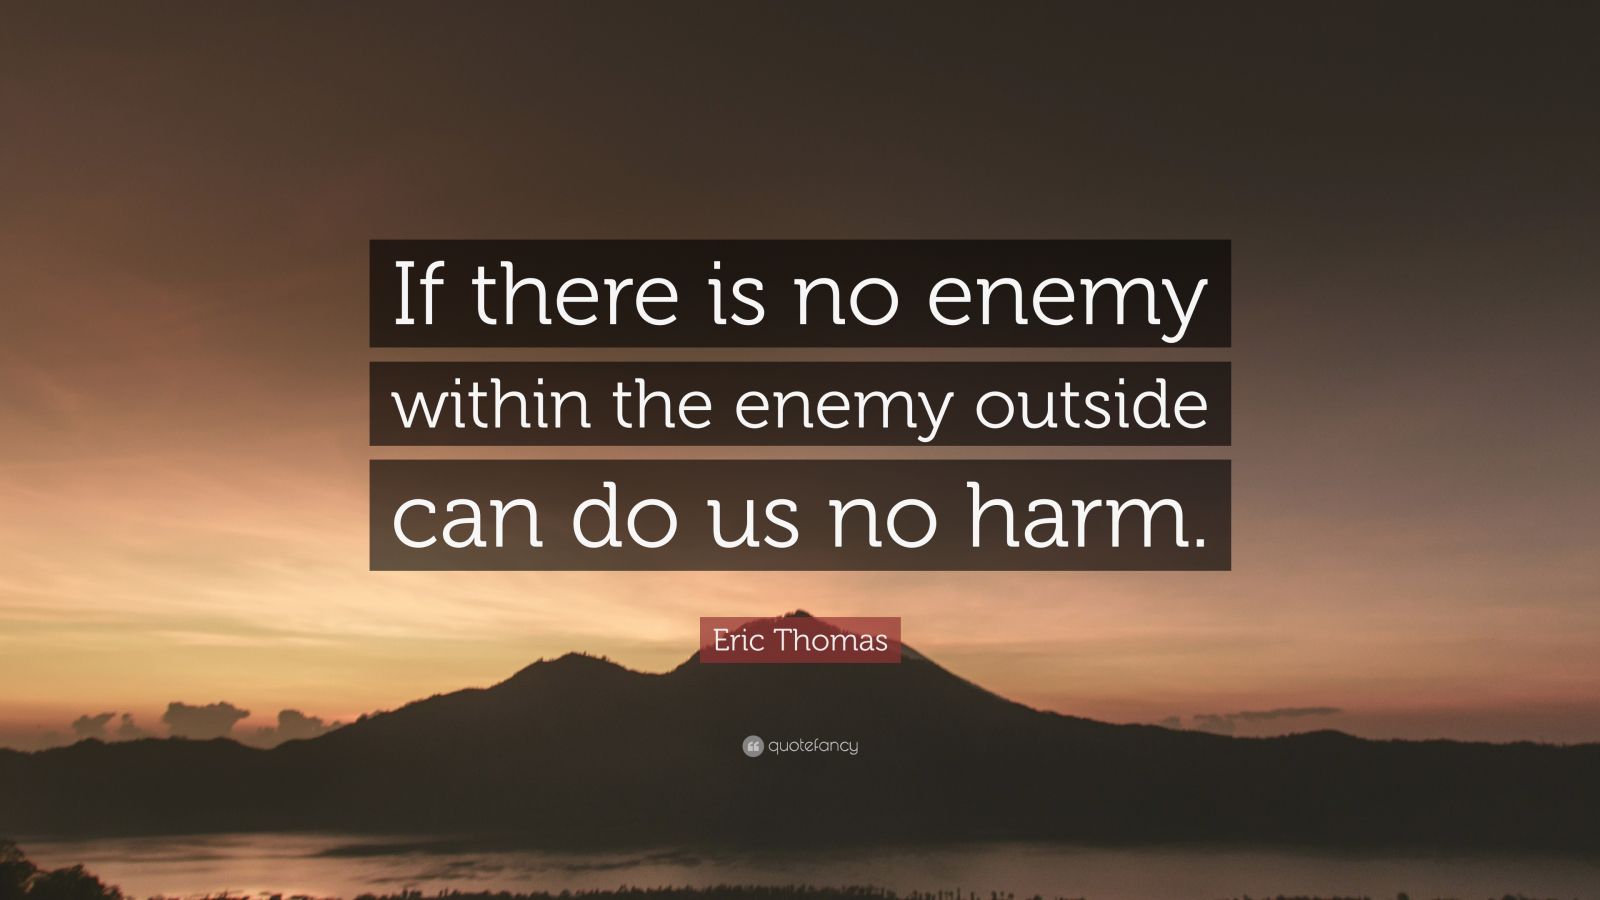 Eric Thomas Quote: “If there is no enemy within the enemy outside can